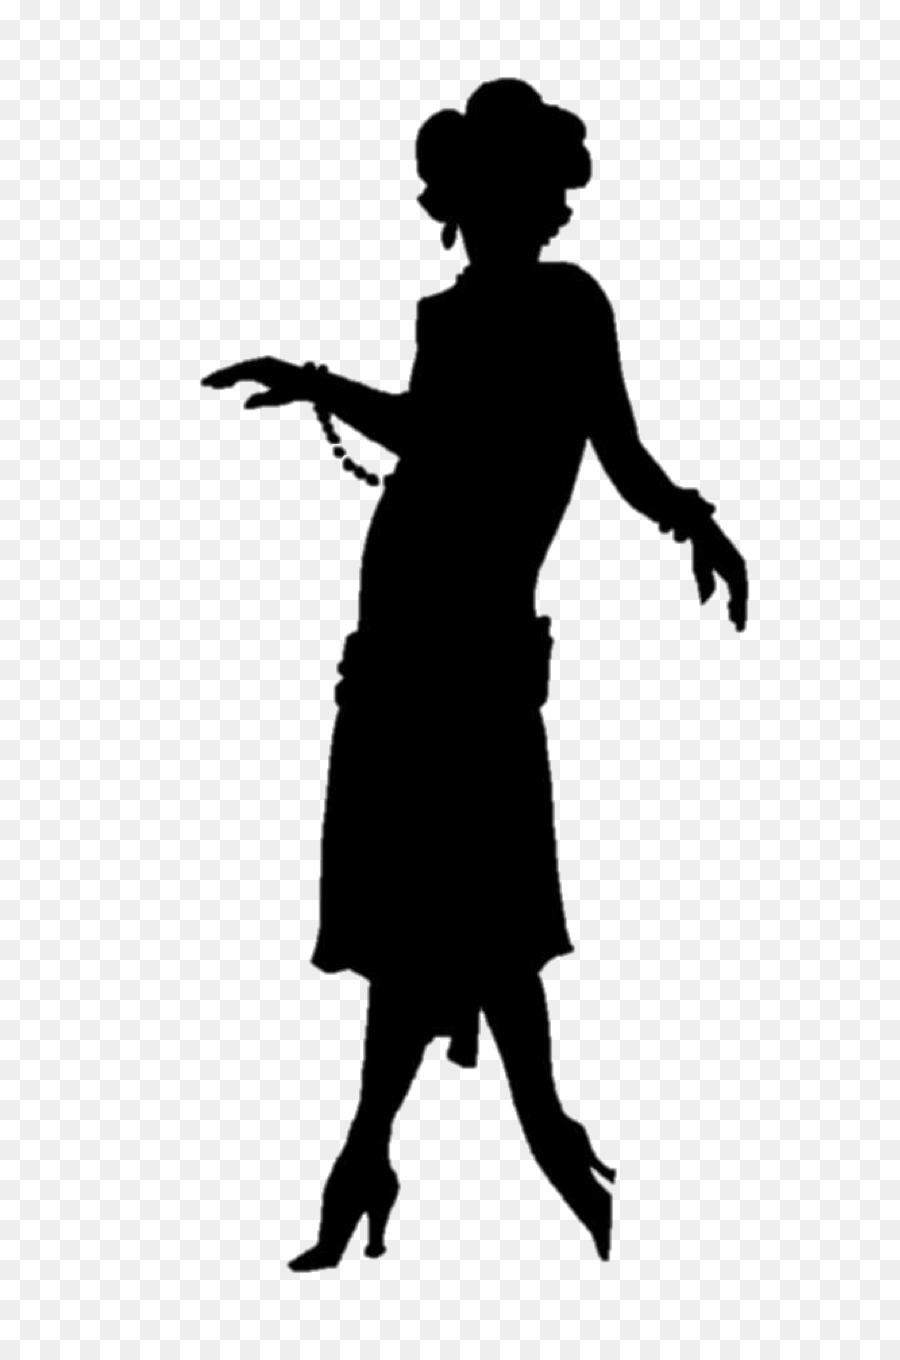 1920s Flapper Silhouette Roaring Twenties - dancer silhouette png download - 854*1350 - Free Transparent Flapper png Download.